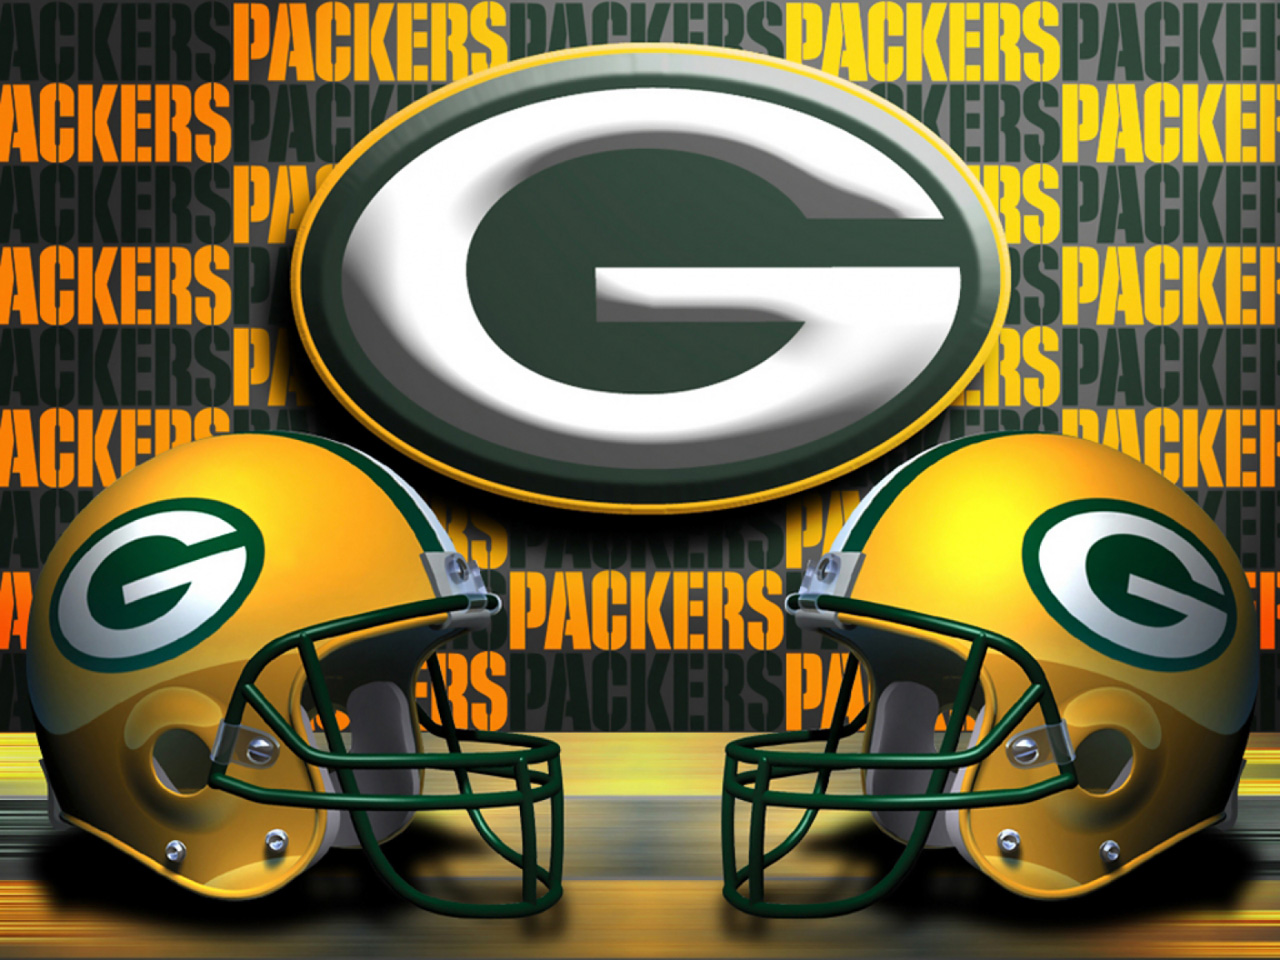 Green Bay Packers Wallpaper Image Graphics Ments And Pictures